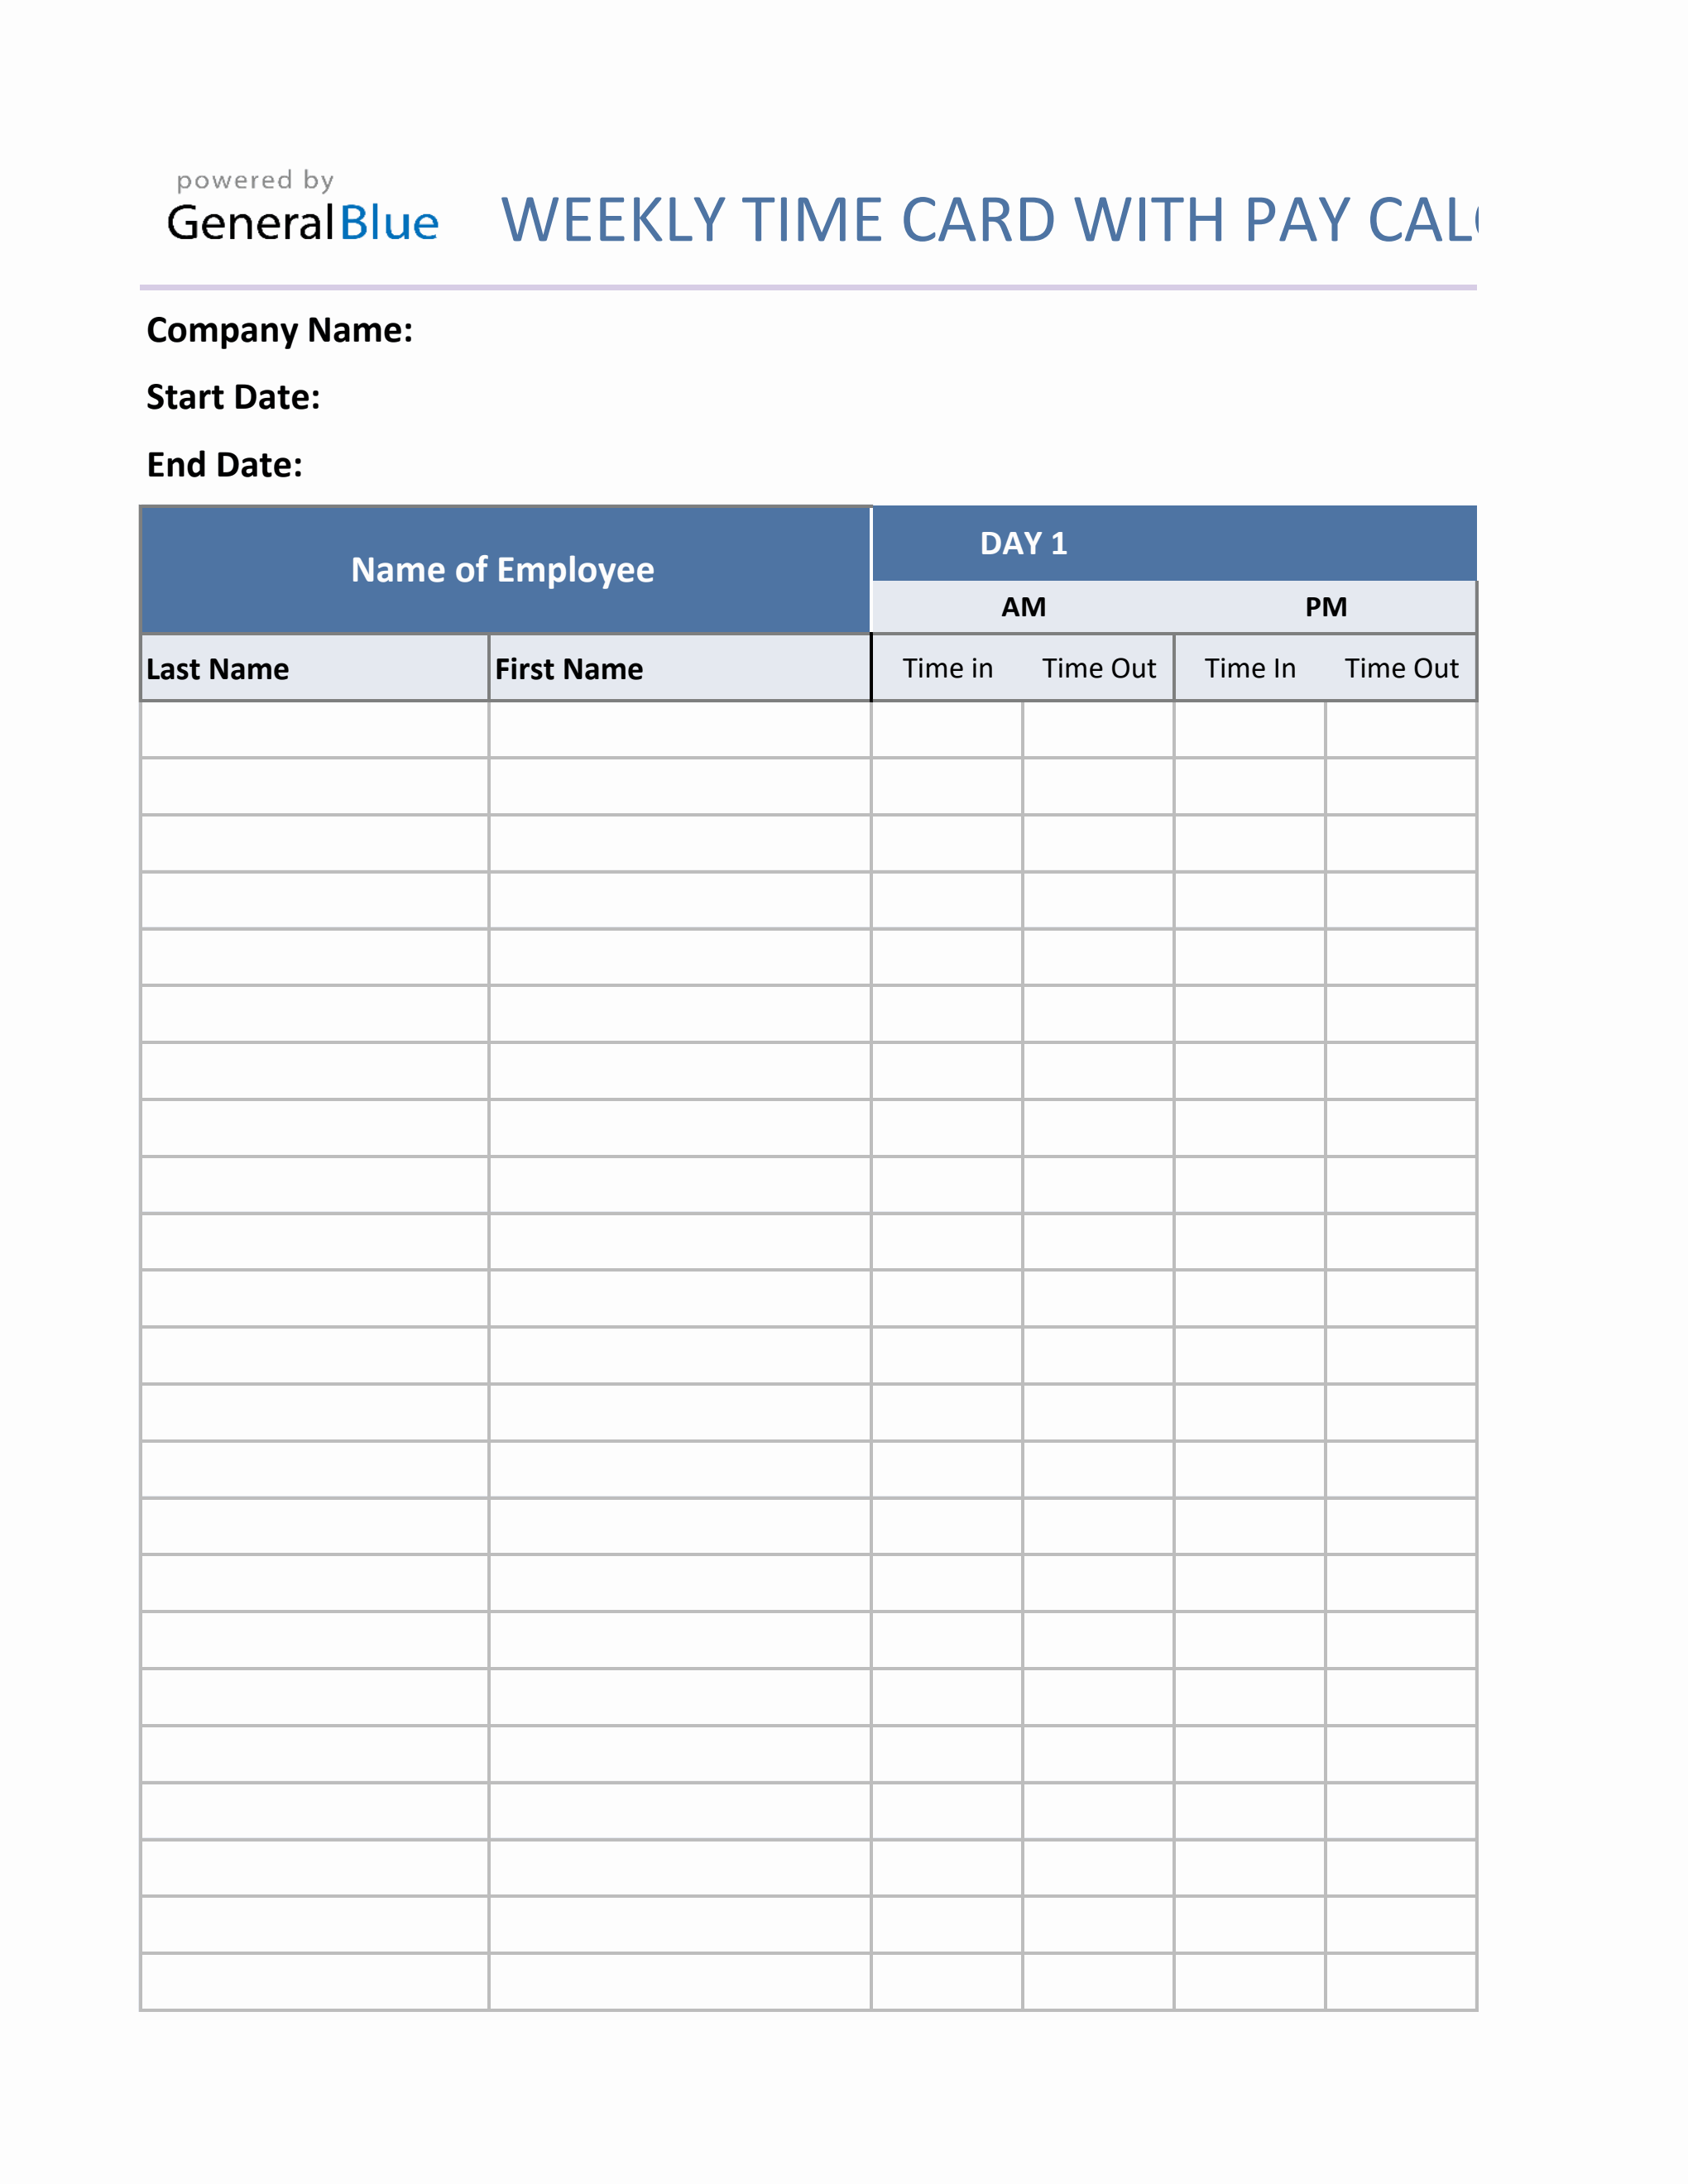 Weekly Timecard With Pay Calculation For Contractors in Excel